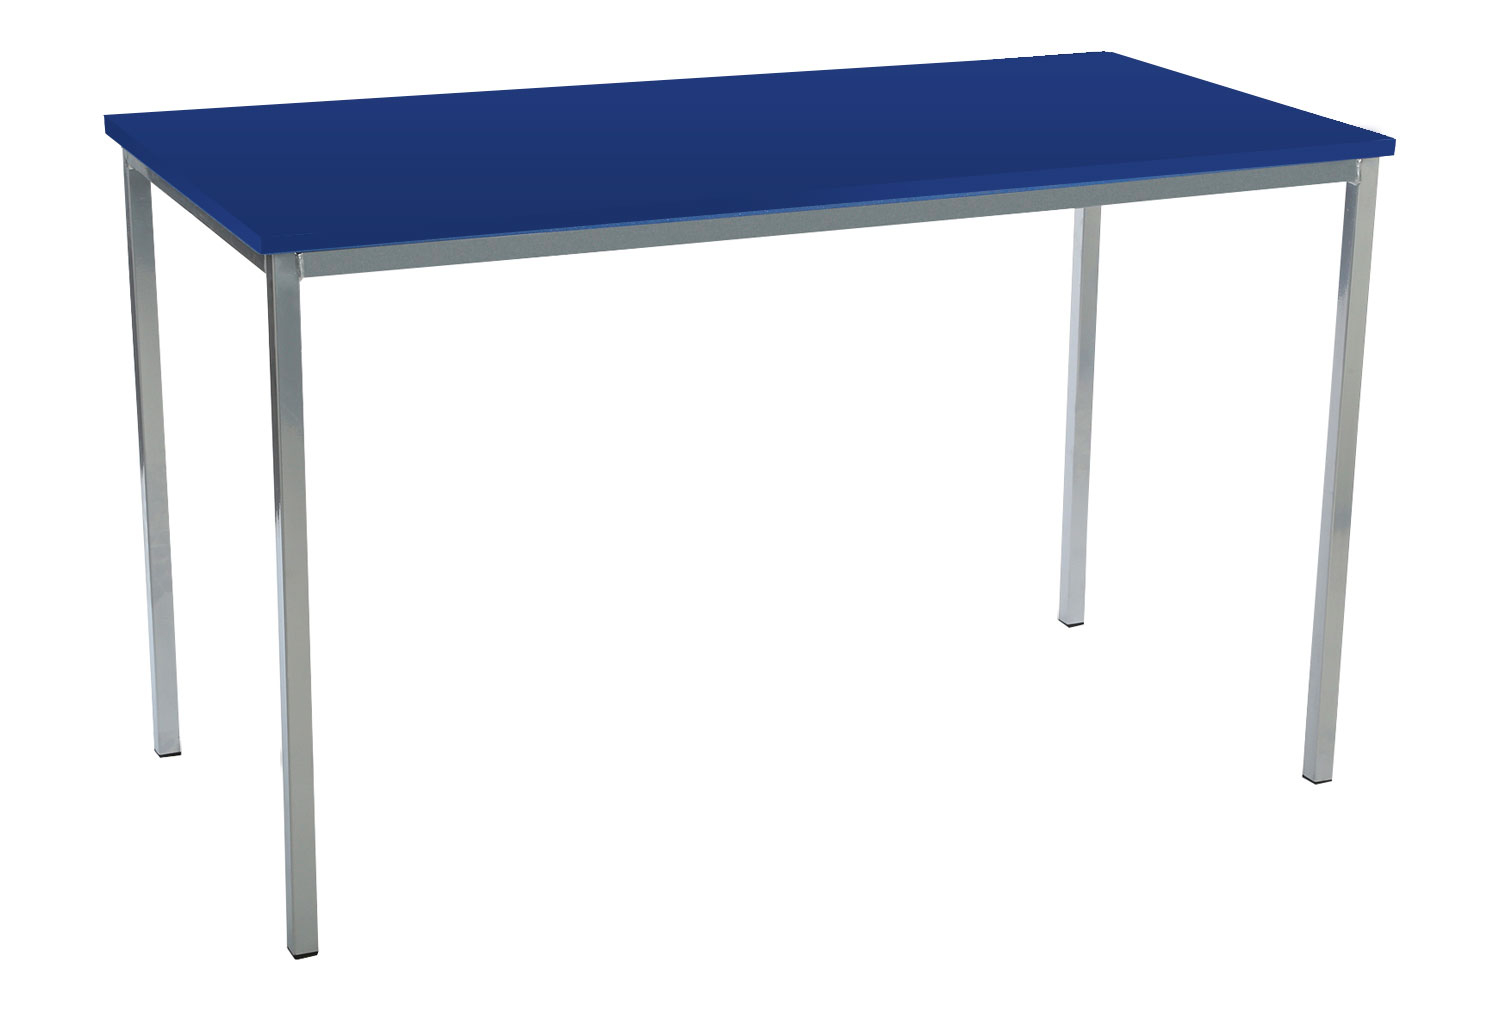 Qty 6 - Educate Fully Welded Rectangular Classroom Tables 11-14 Years (PVC Edge), 110wx55d (cm), Black Frame, Beech Top